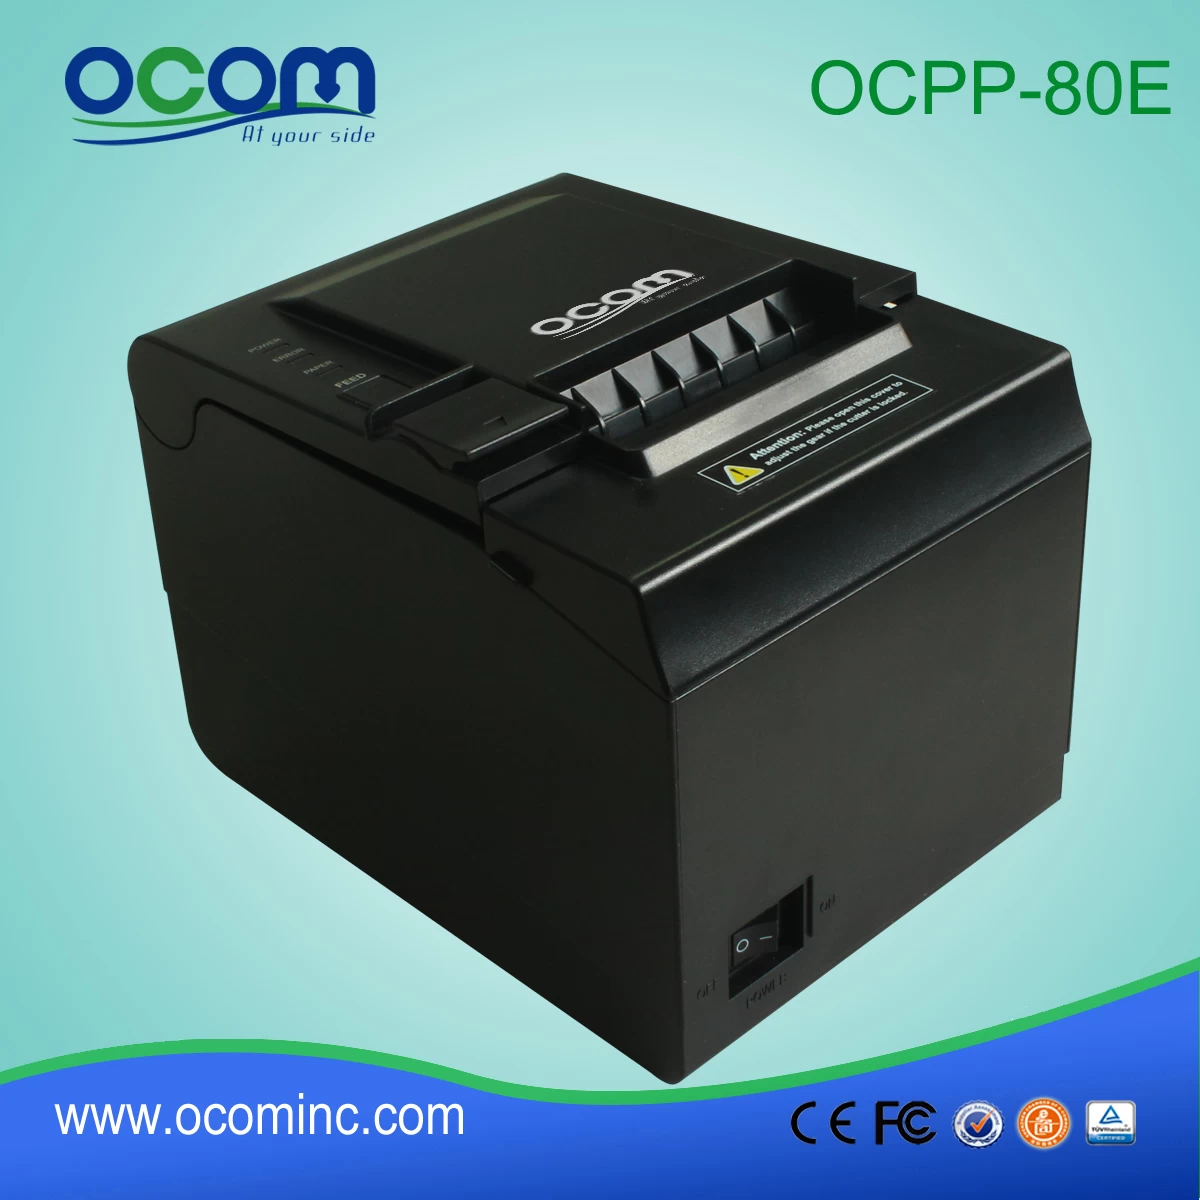 OCPP-80E---China facory made low cost thermal printer